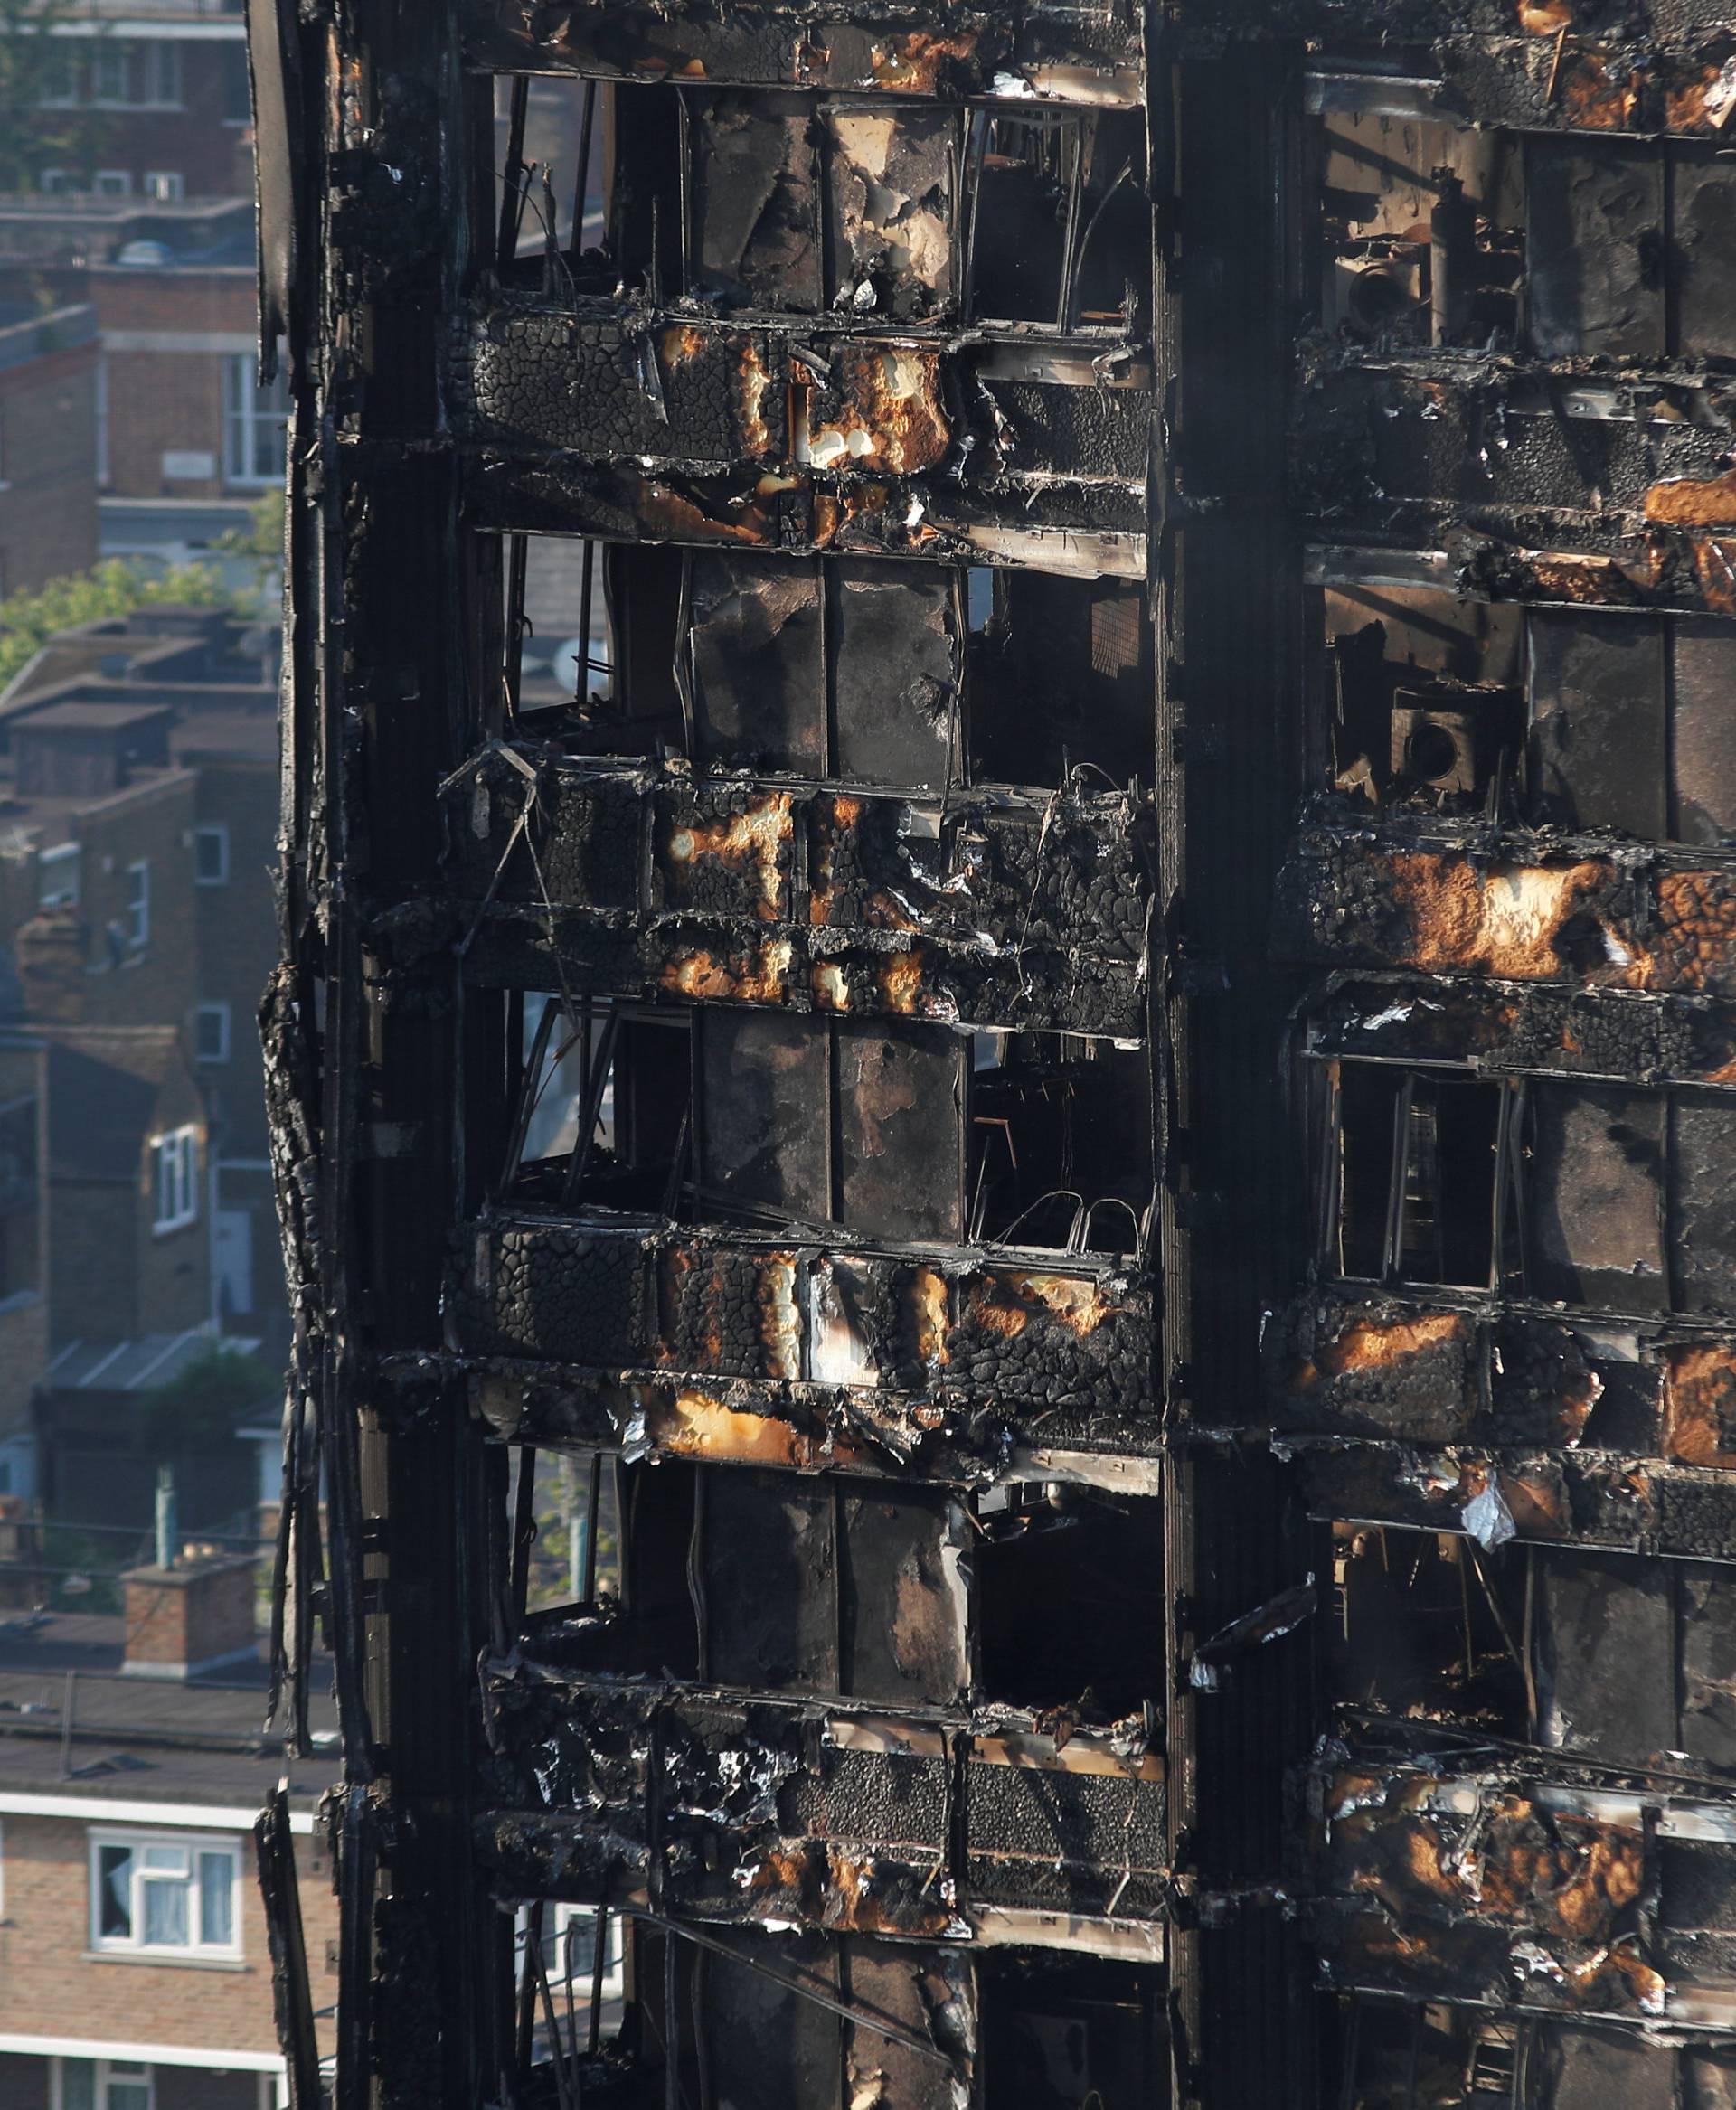 Damage is seen to a tower block which was destroyed in a fire disaster, in north Kensington, West London